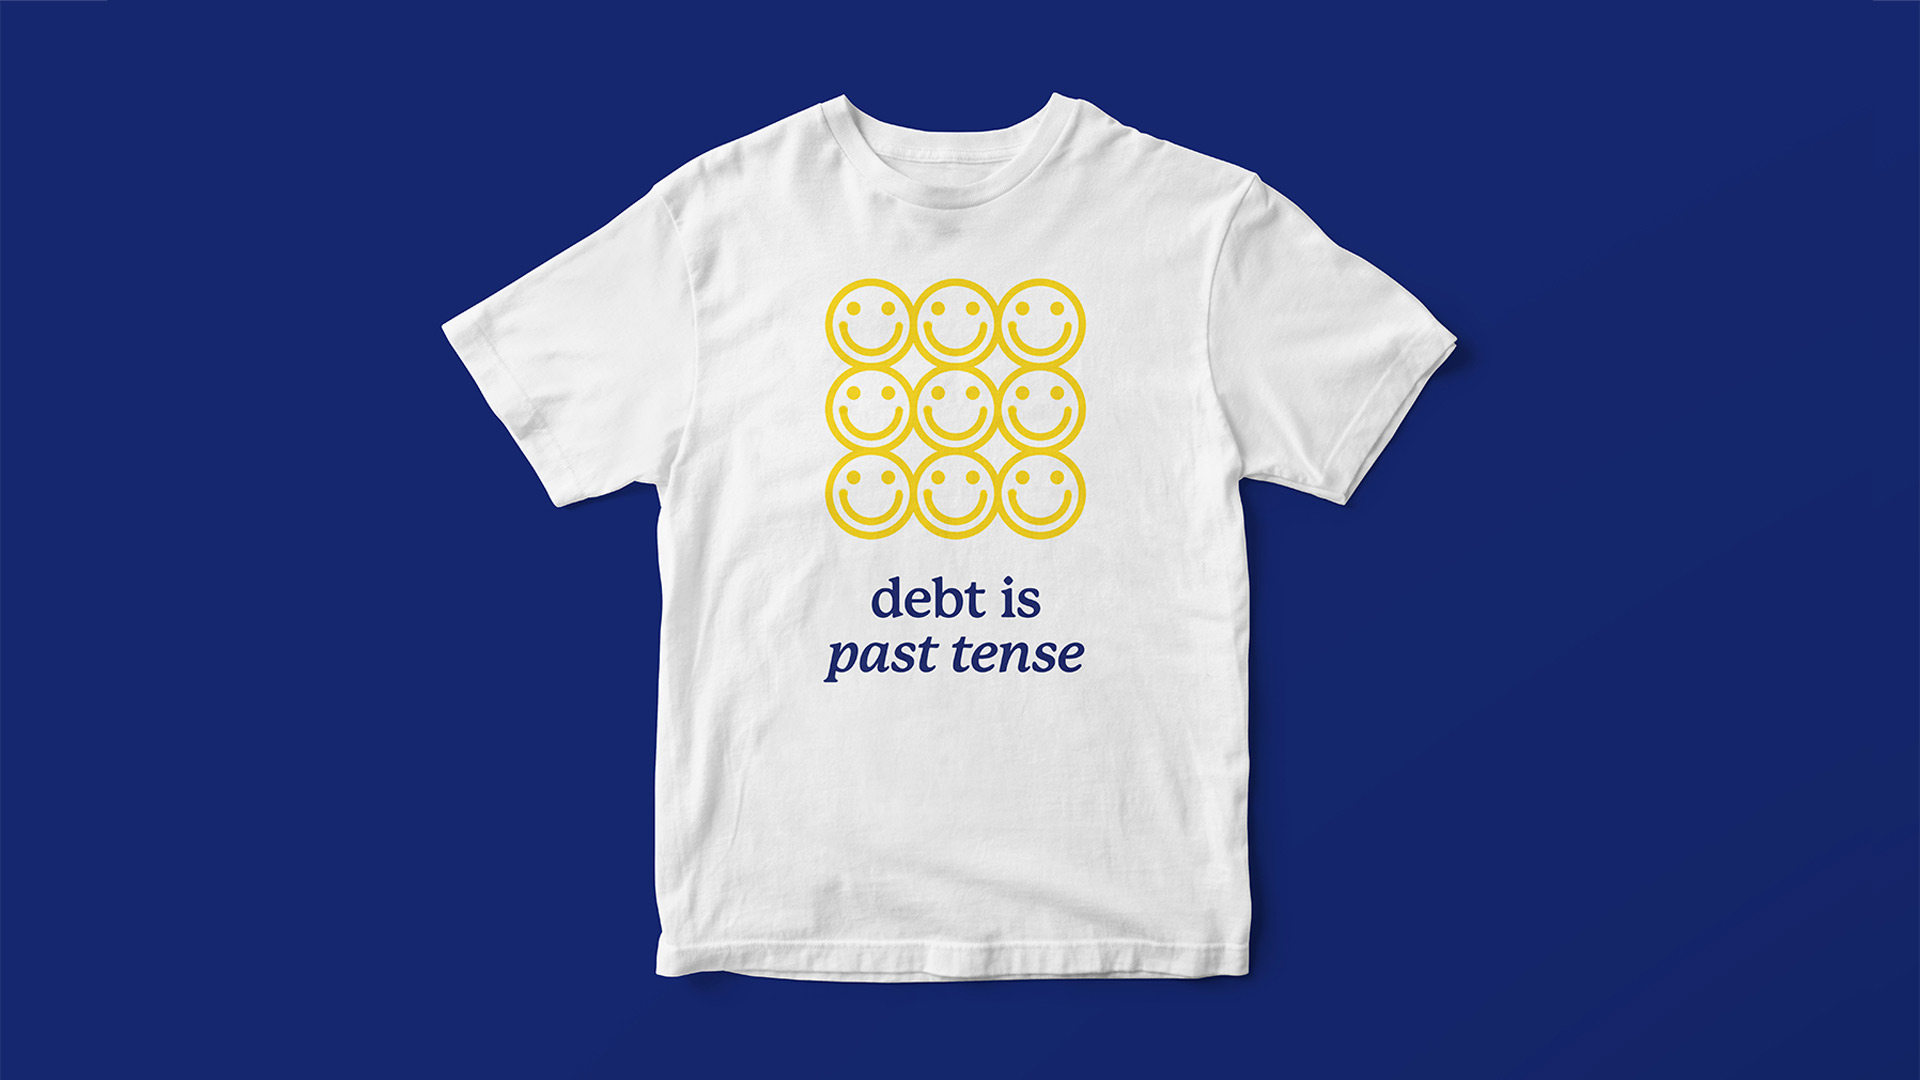 See Saw t-shirt, smiley faces with type that reads "debt is past tense"